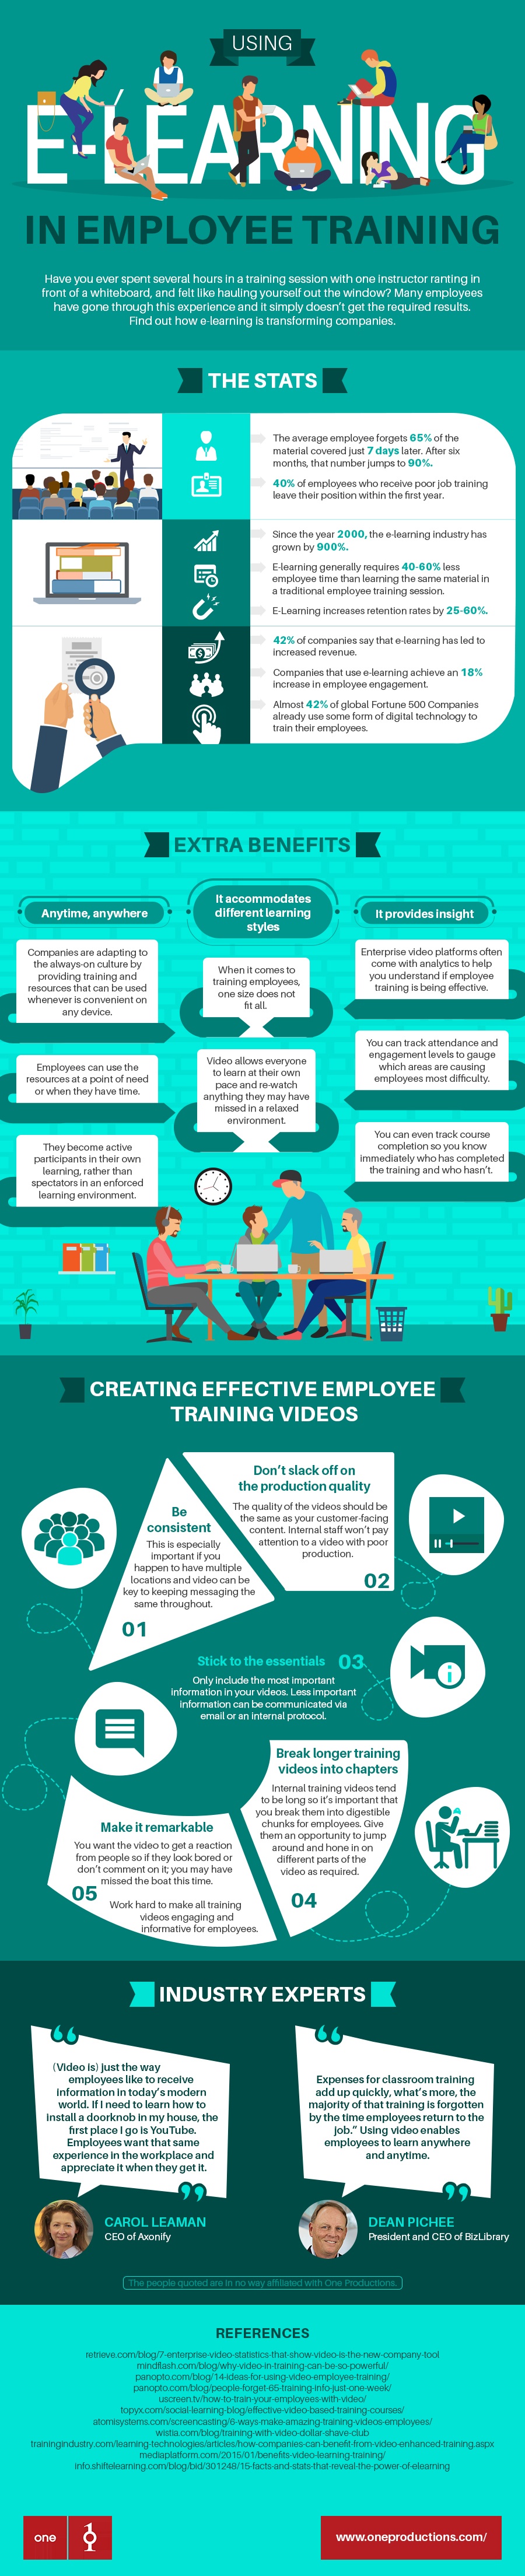 Using eLearning in Employee Training Infographic